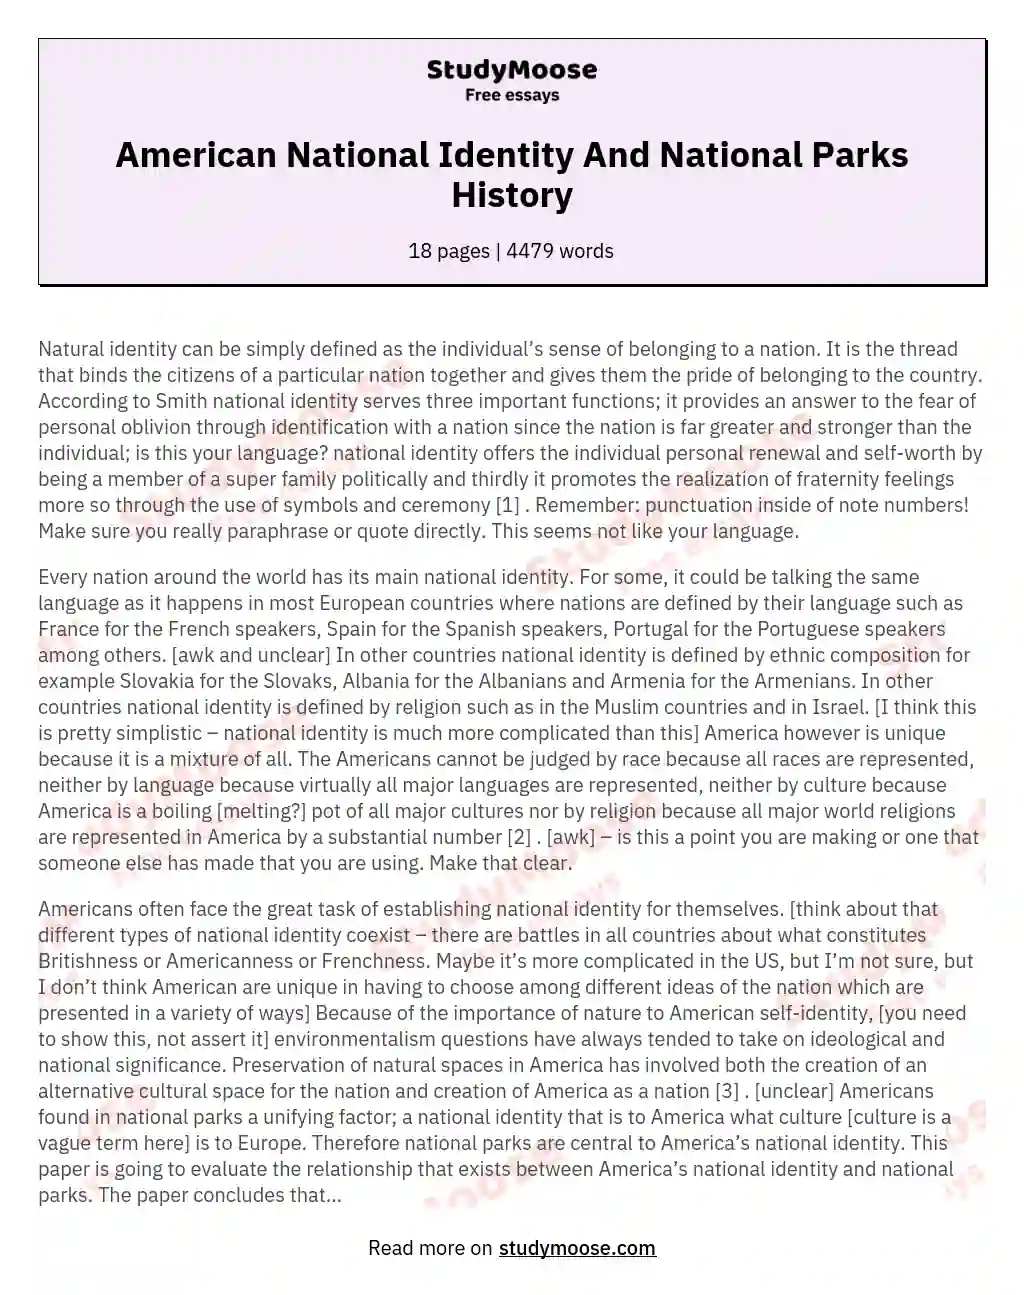 American National Identity And National Parks History